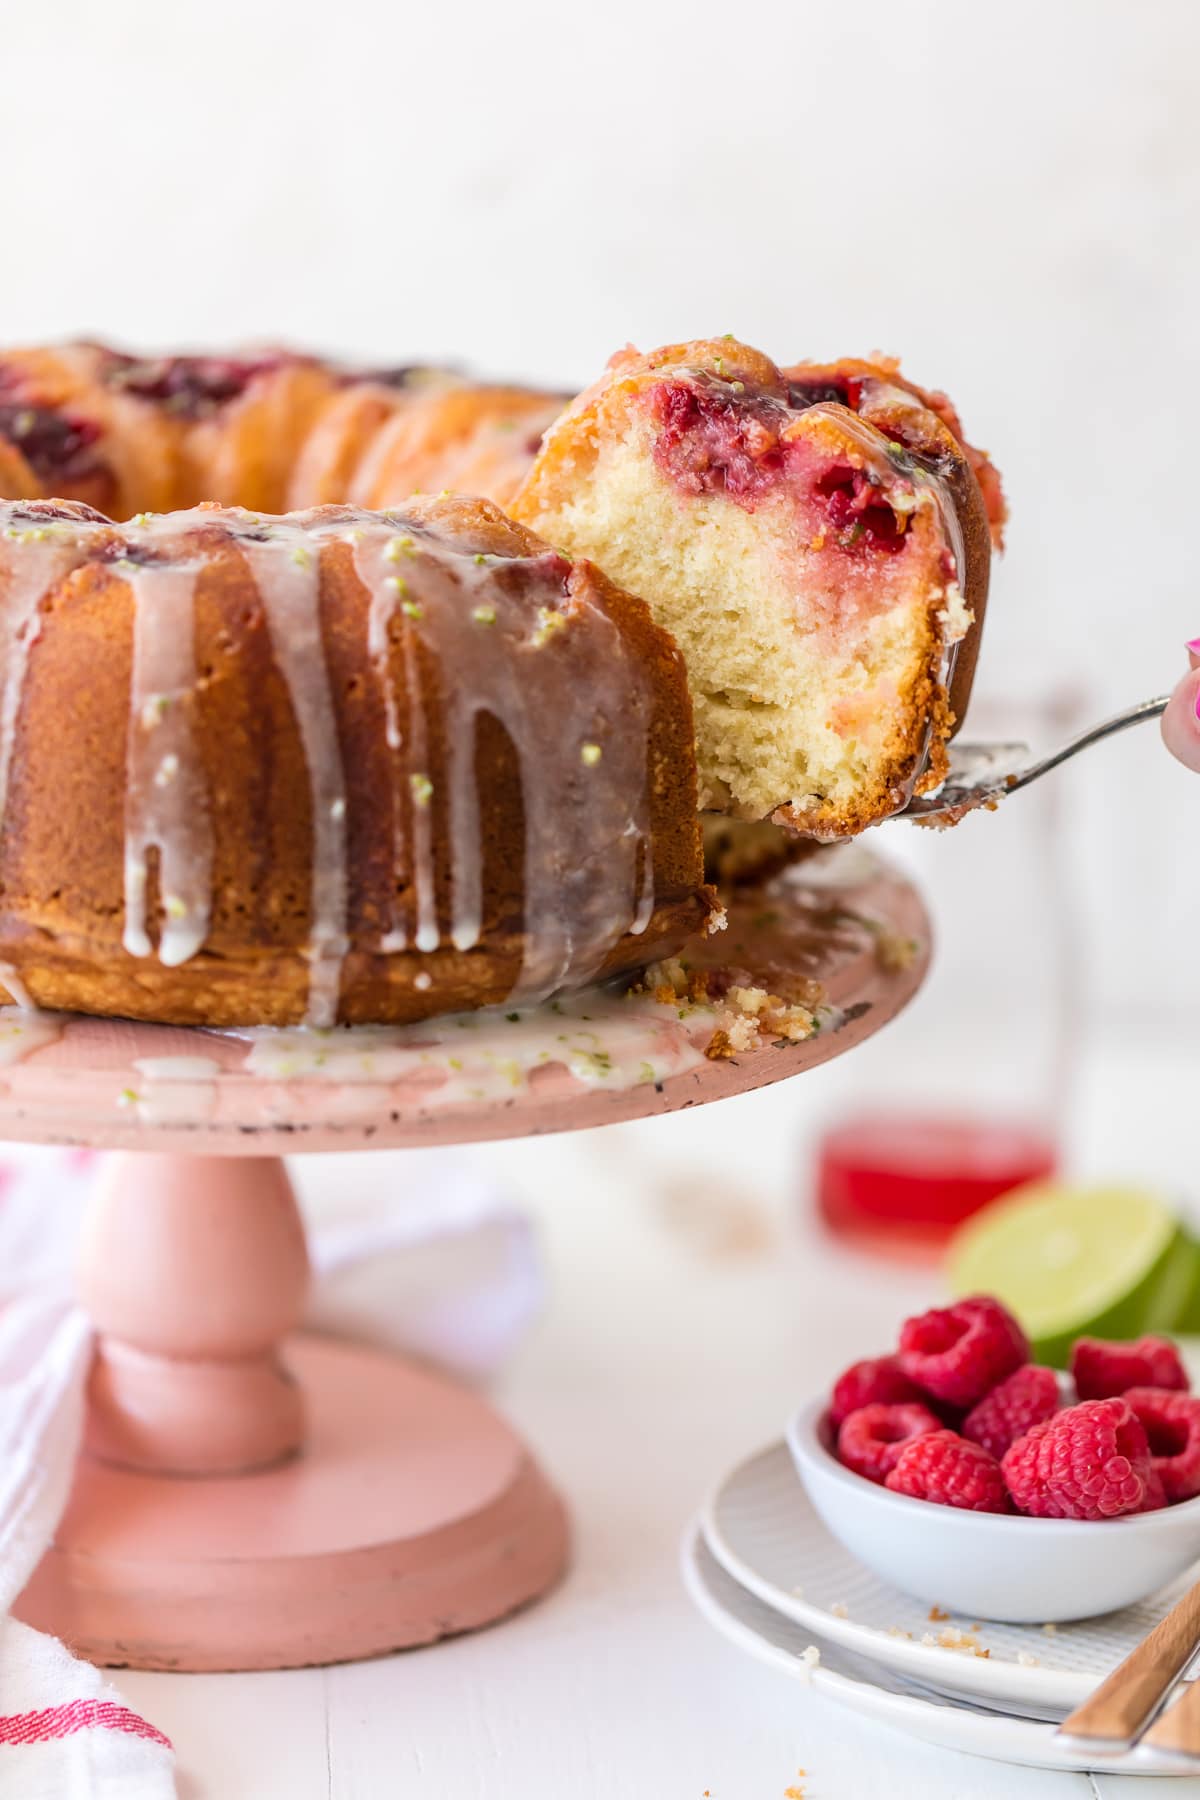 This RASPBERRY MOSCOW MULE CAKE makes life a little bit sweeter! Made with fresh raspberries, ginger beer, raspberry moscow mule simple syrup, and fresh lime glaze! YUM!